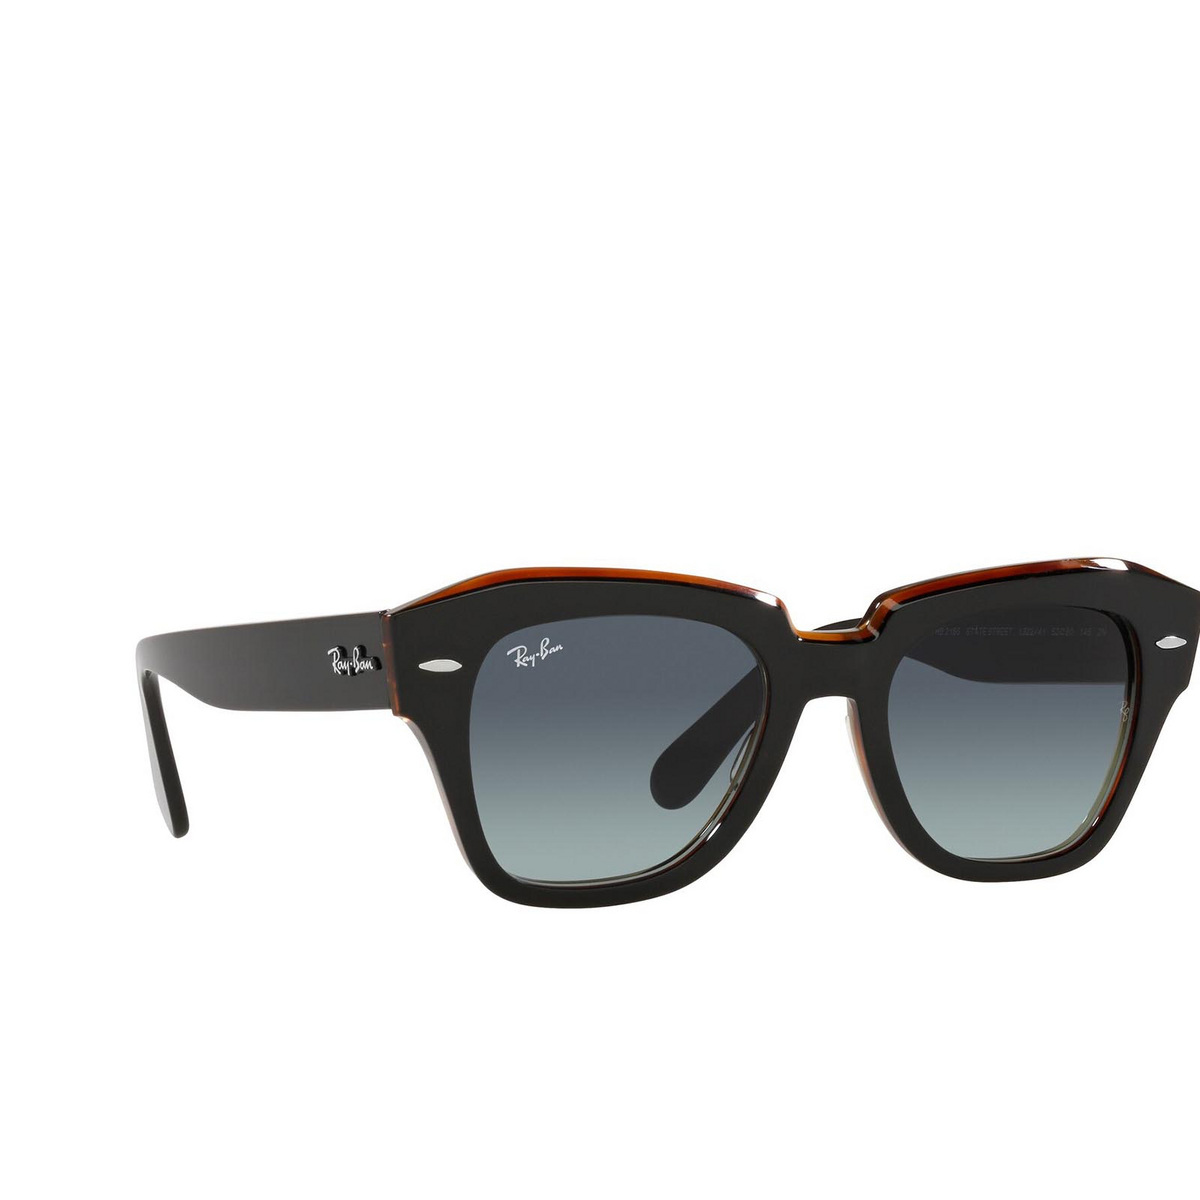 Ray-Ban STATE STREET Sunglasses 132241 Black on Transparent Brown - three-quarters view